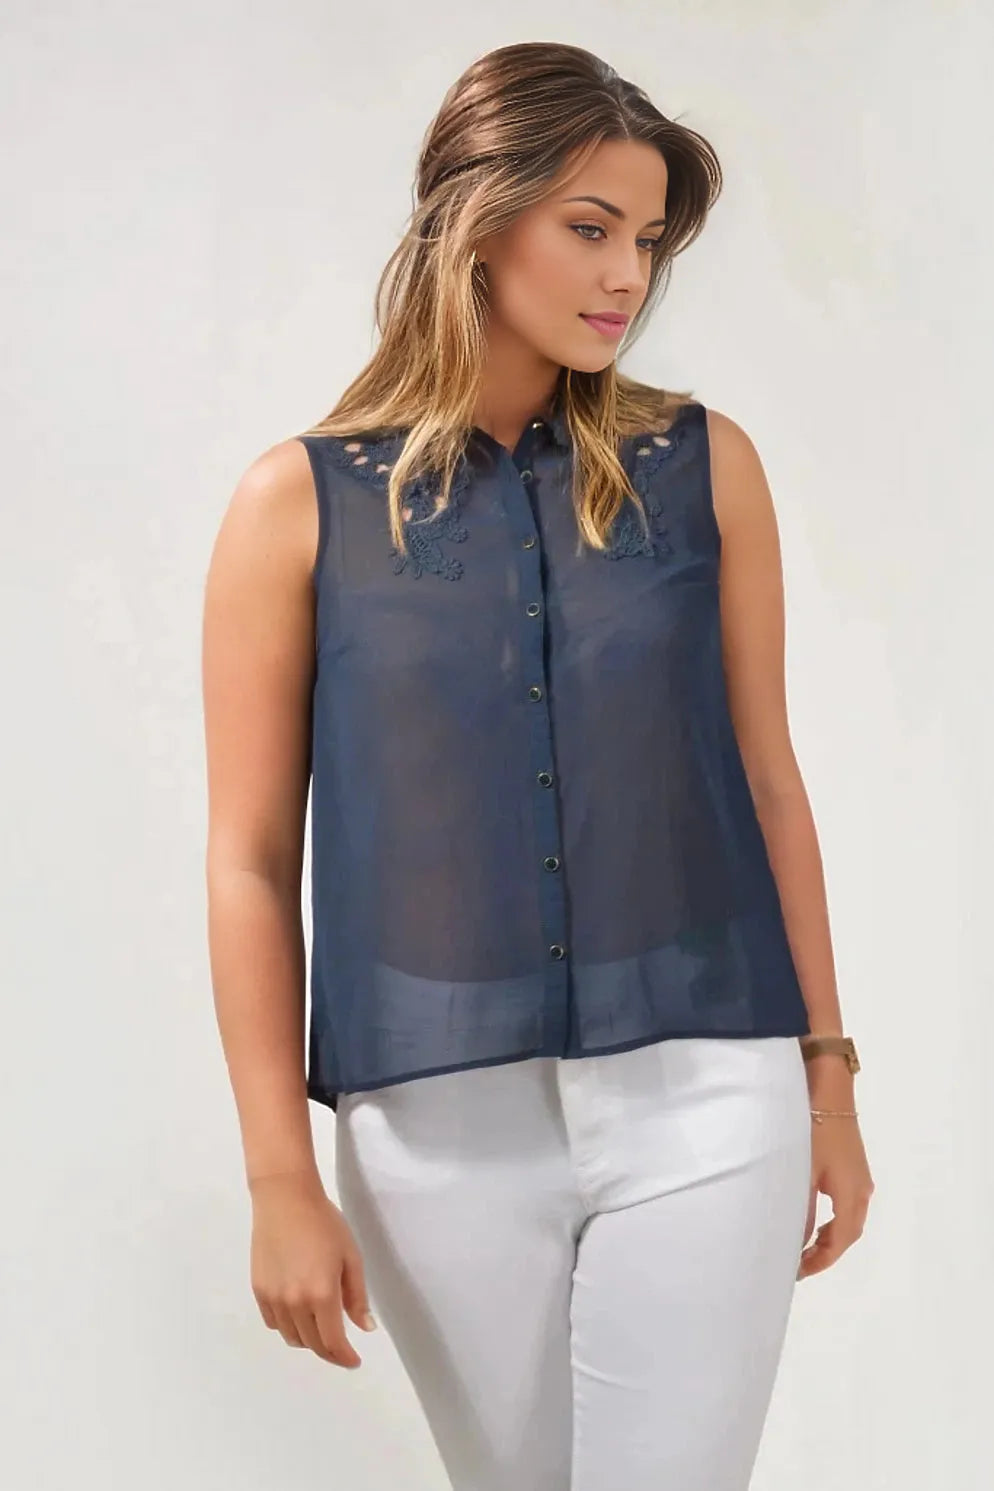 Oasis Lace Top Sleeveless Blouse